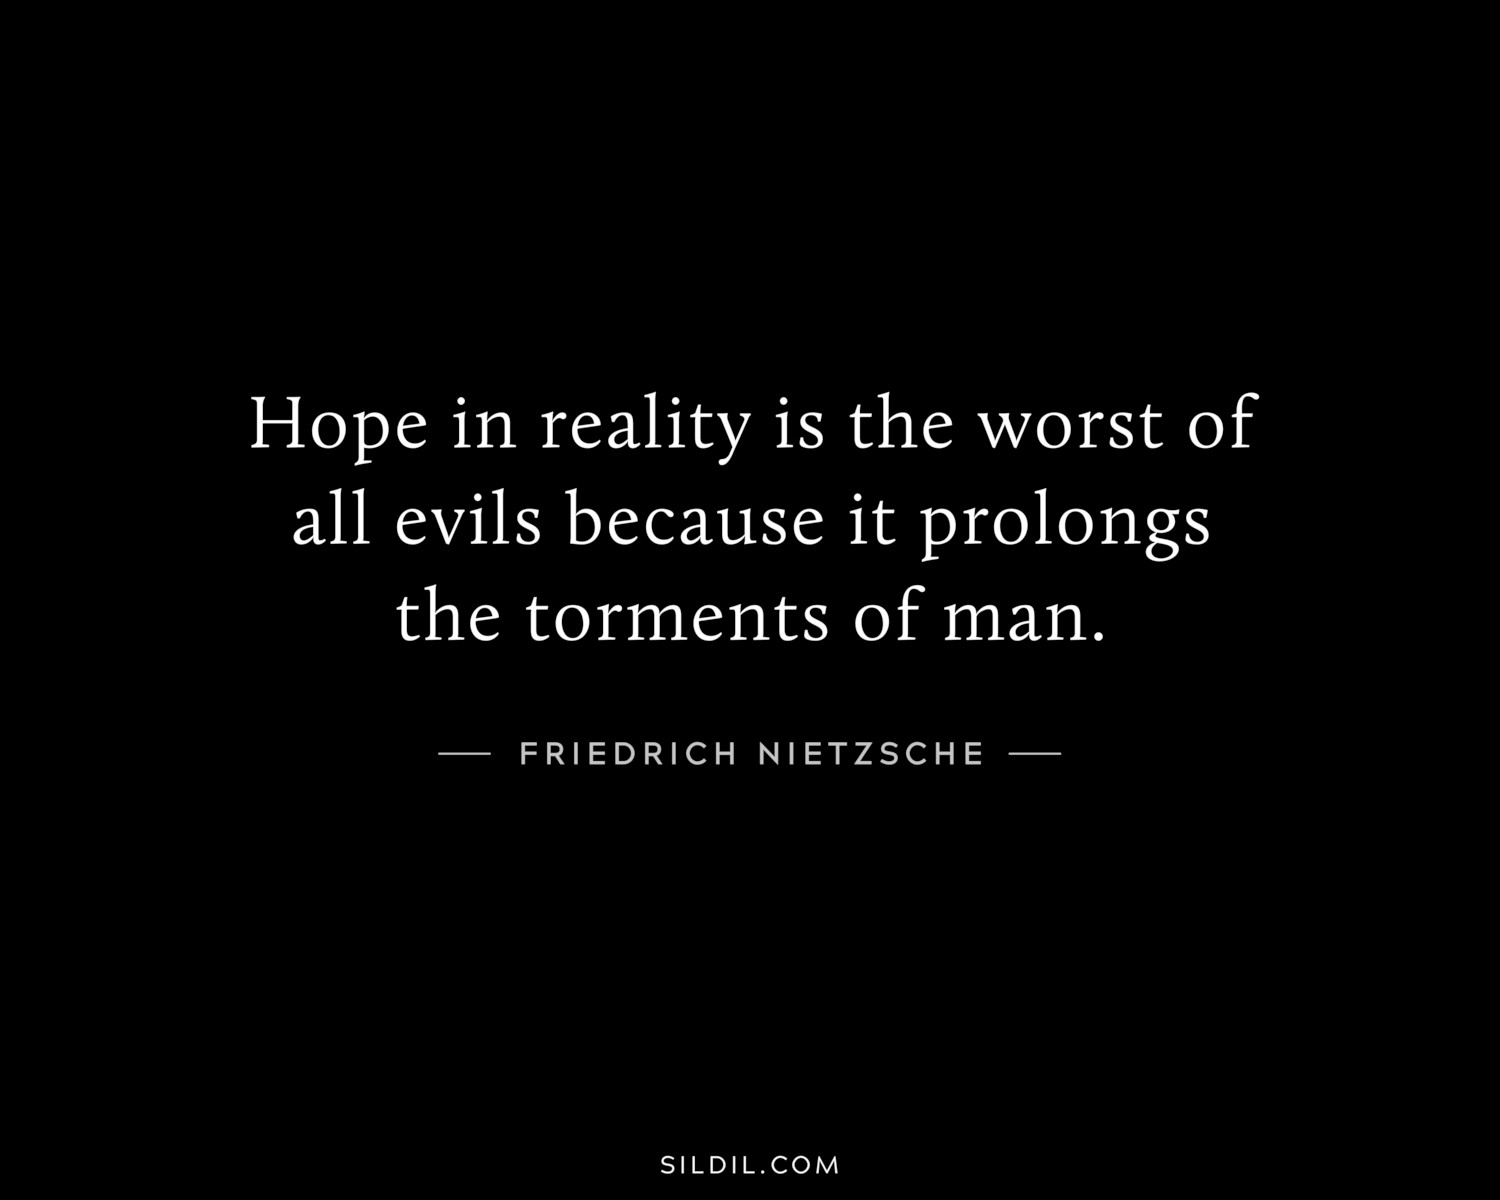 Hope in reality is the worst of all evils because it prolongs the torments of man.